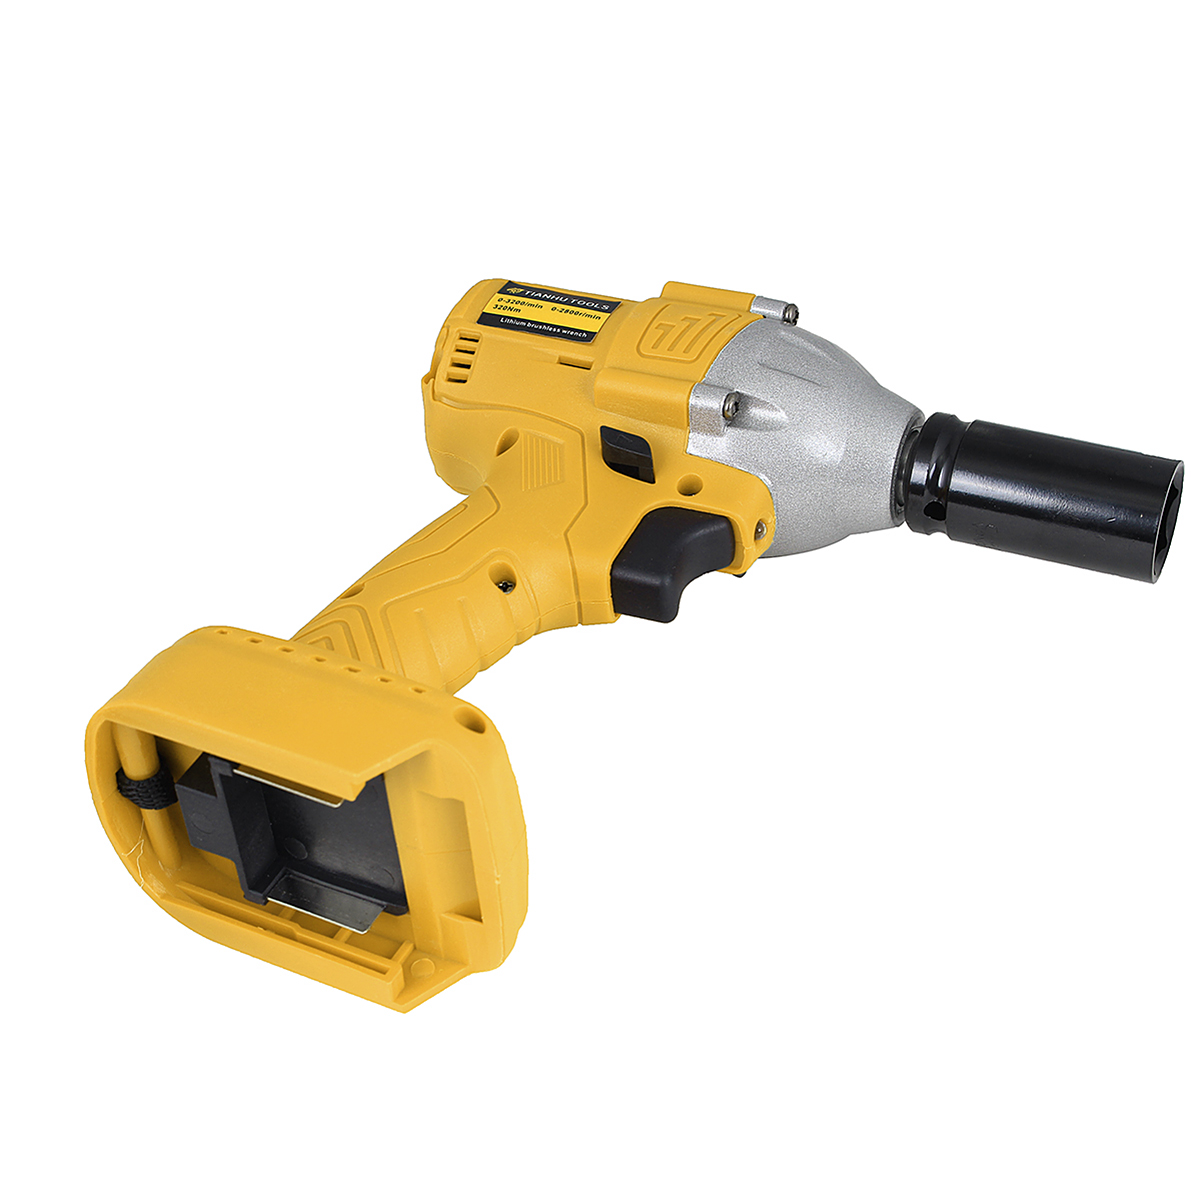 8000mAh-68V-Lithium-Ion-Brushless-Cordless-High-Torque-Square-Drive-Impact-Wrench-1262426-7